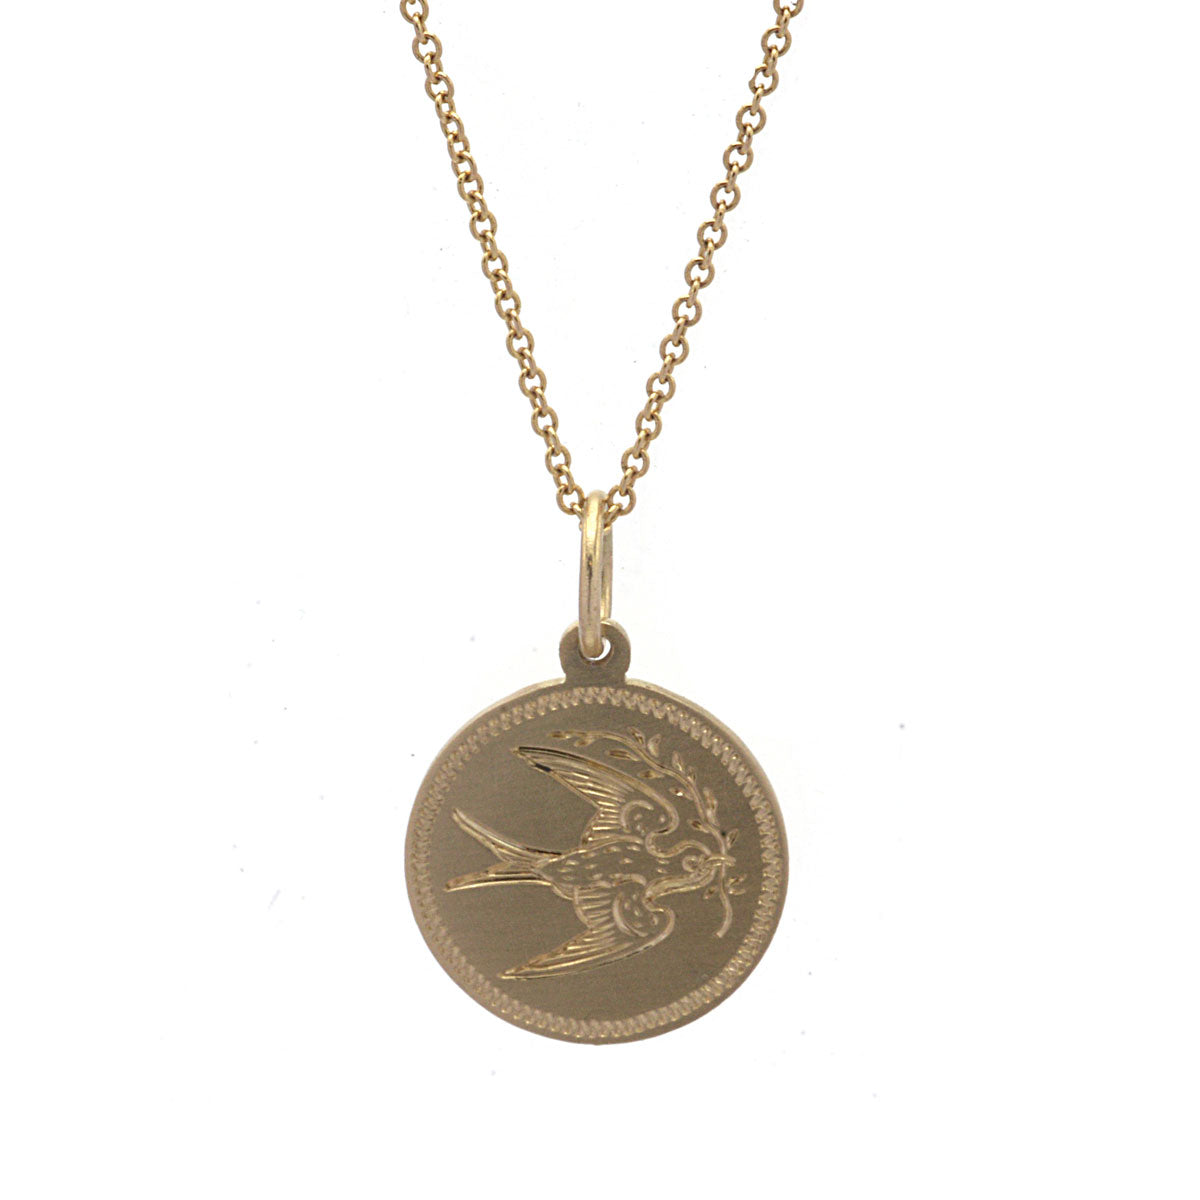 Free Bird Engraved Necklace